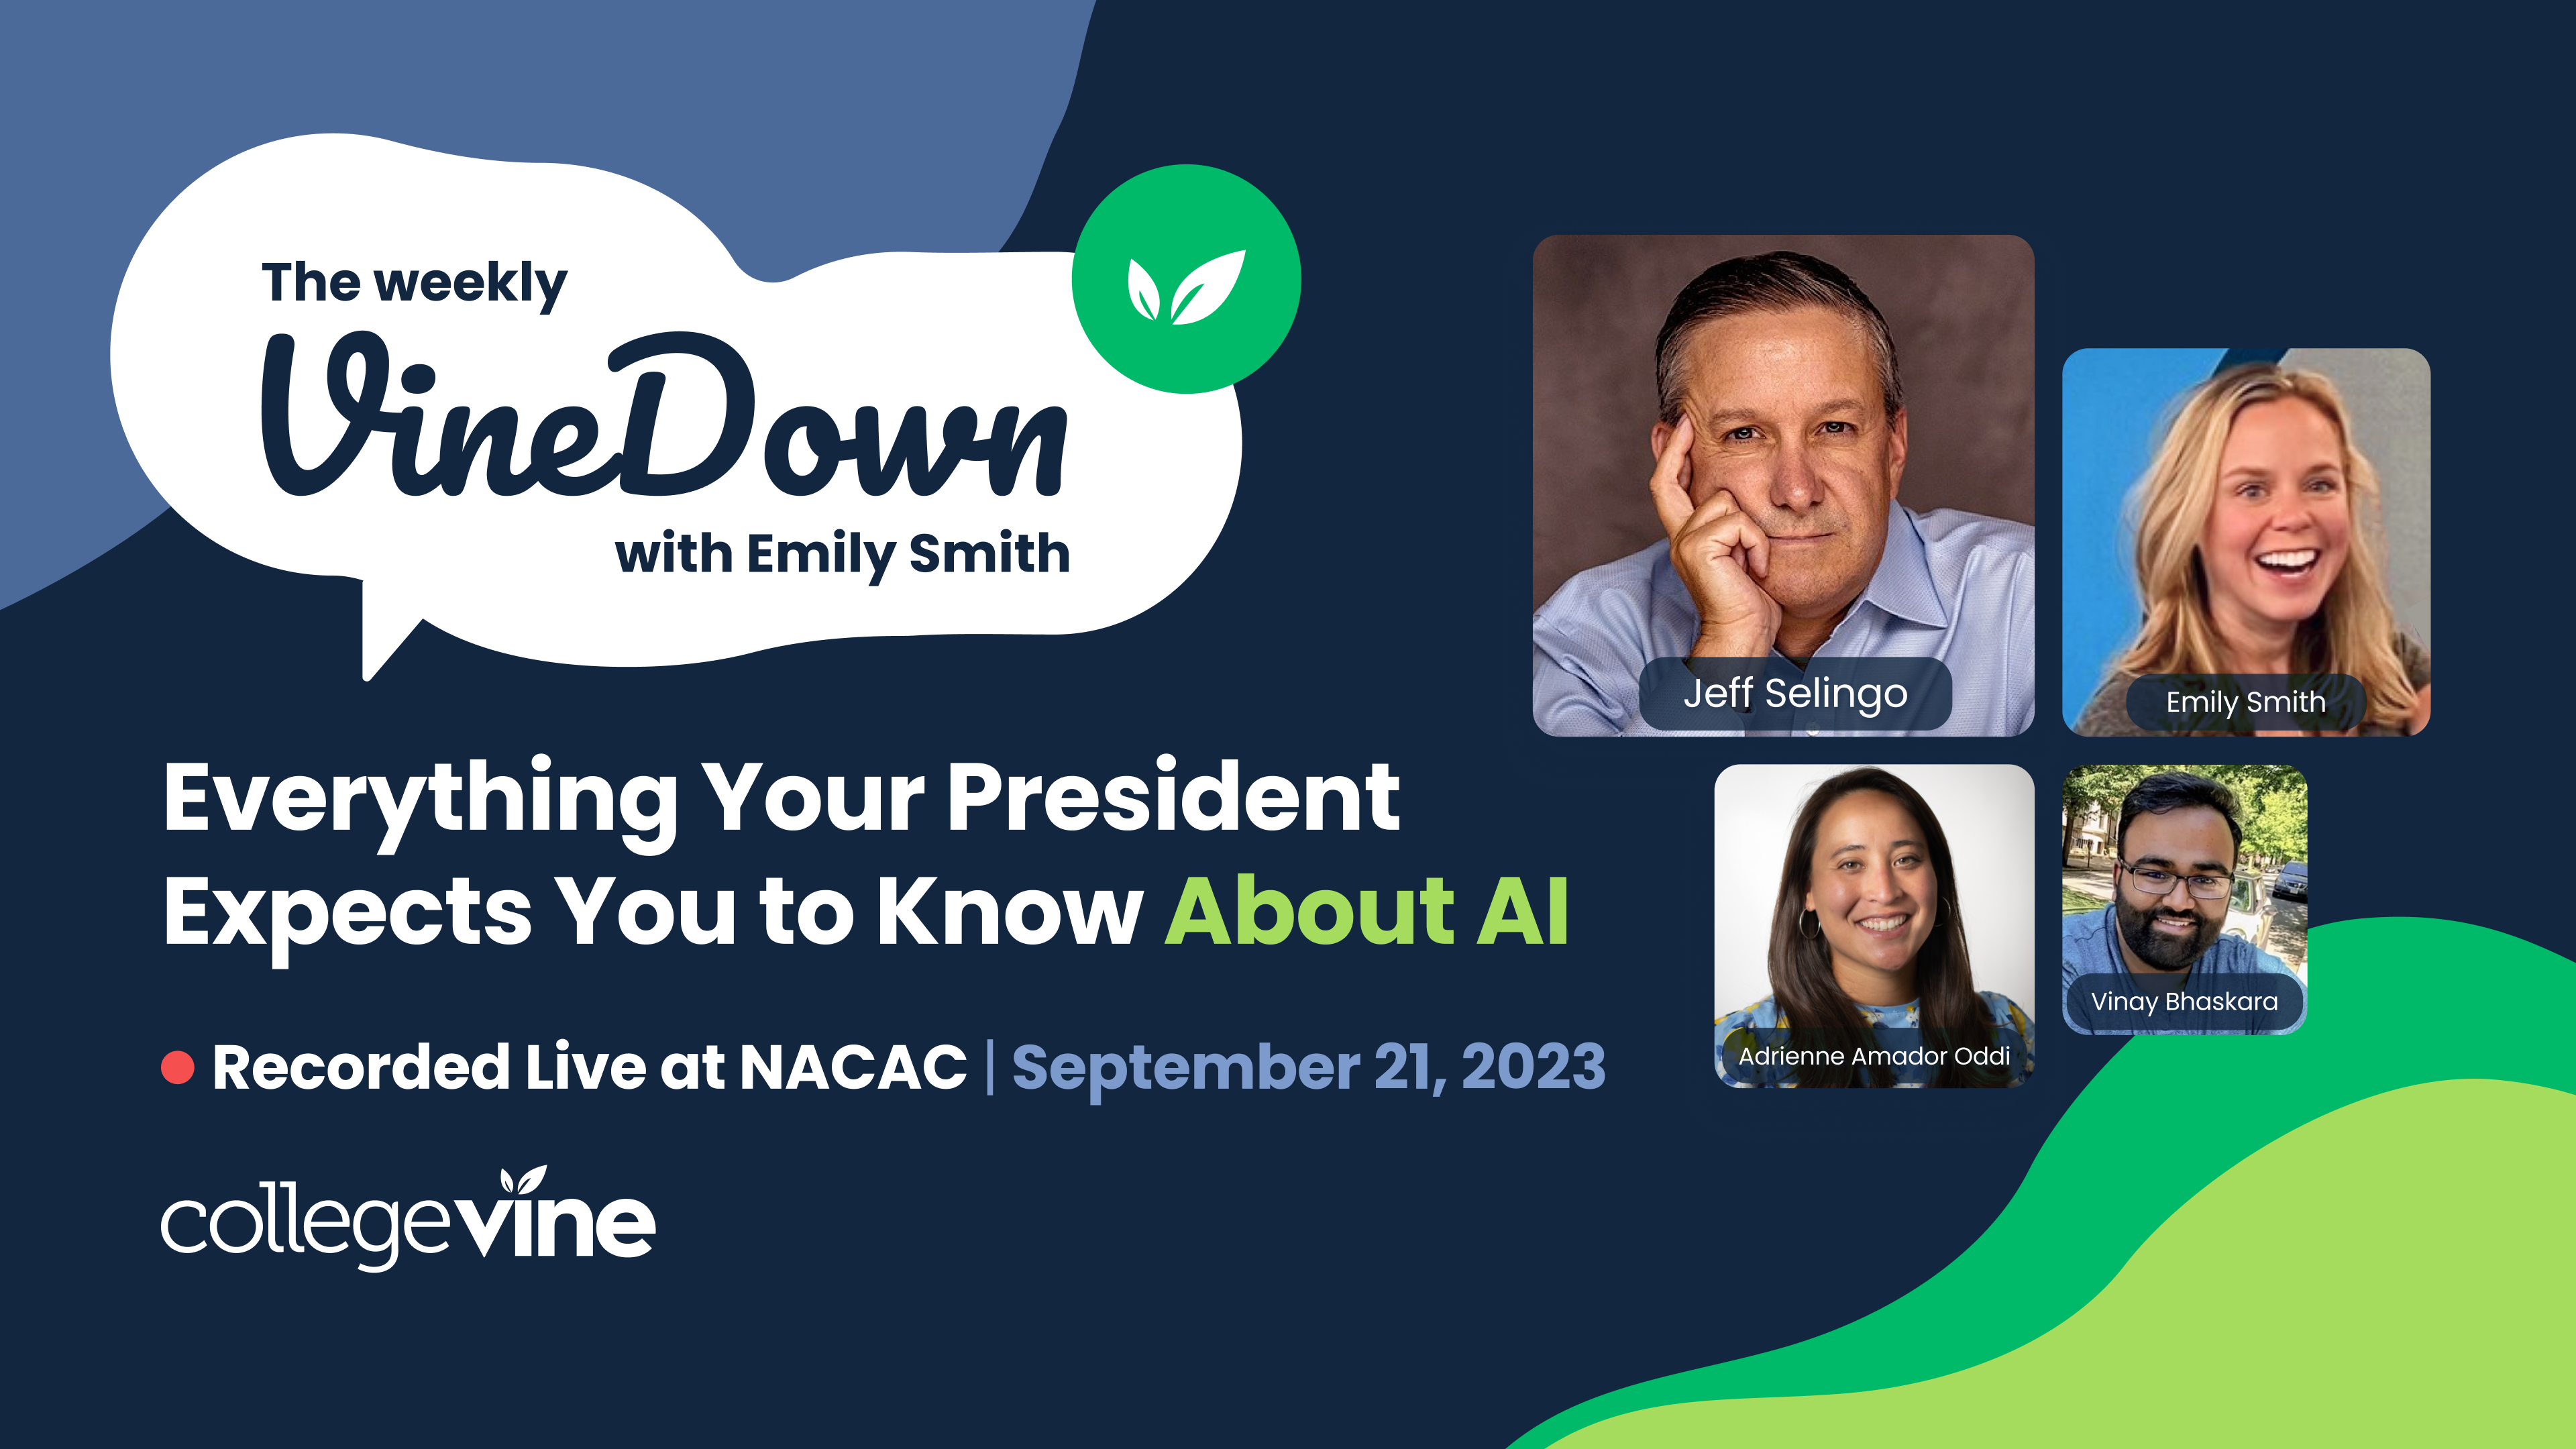 The Weekly VineDown: Everything Your President Expects You To Know About AI